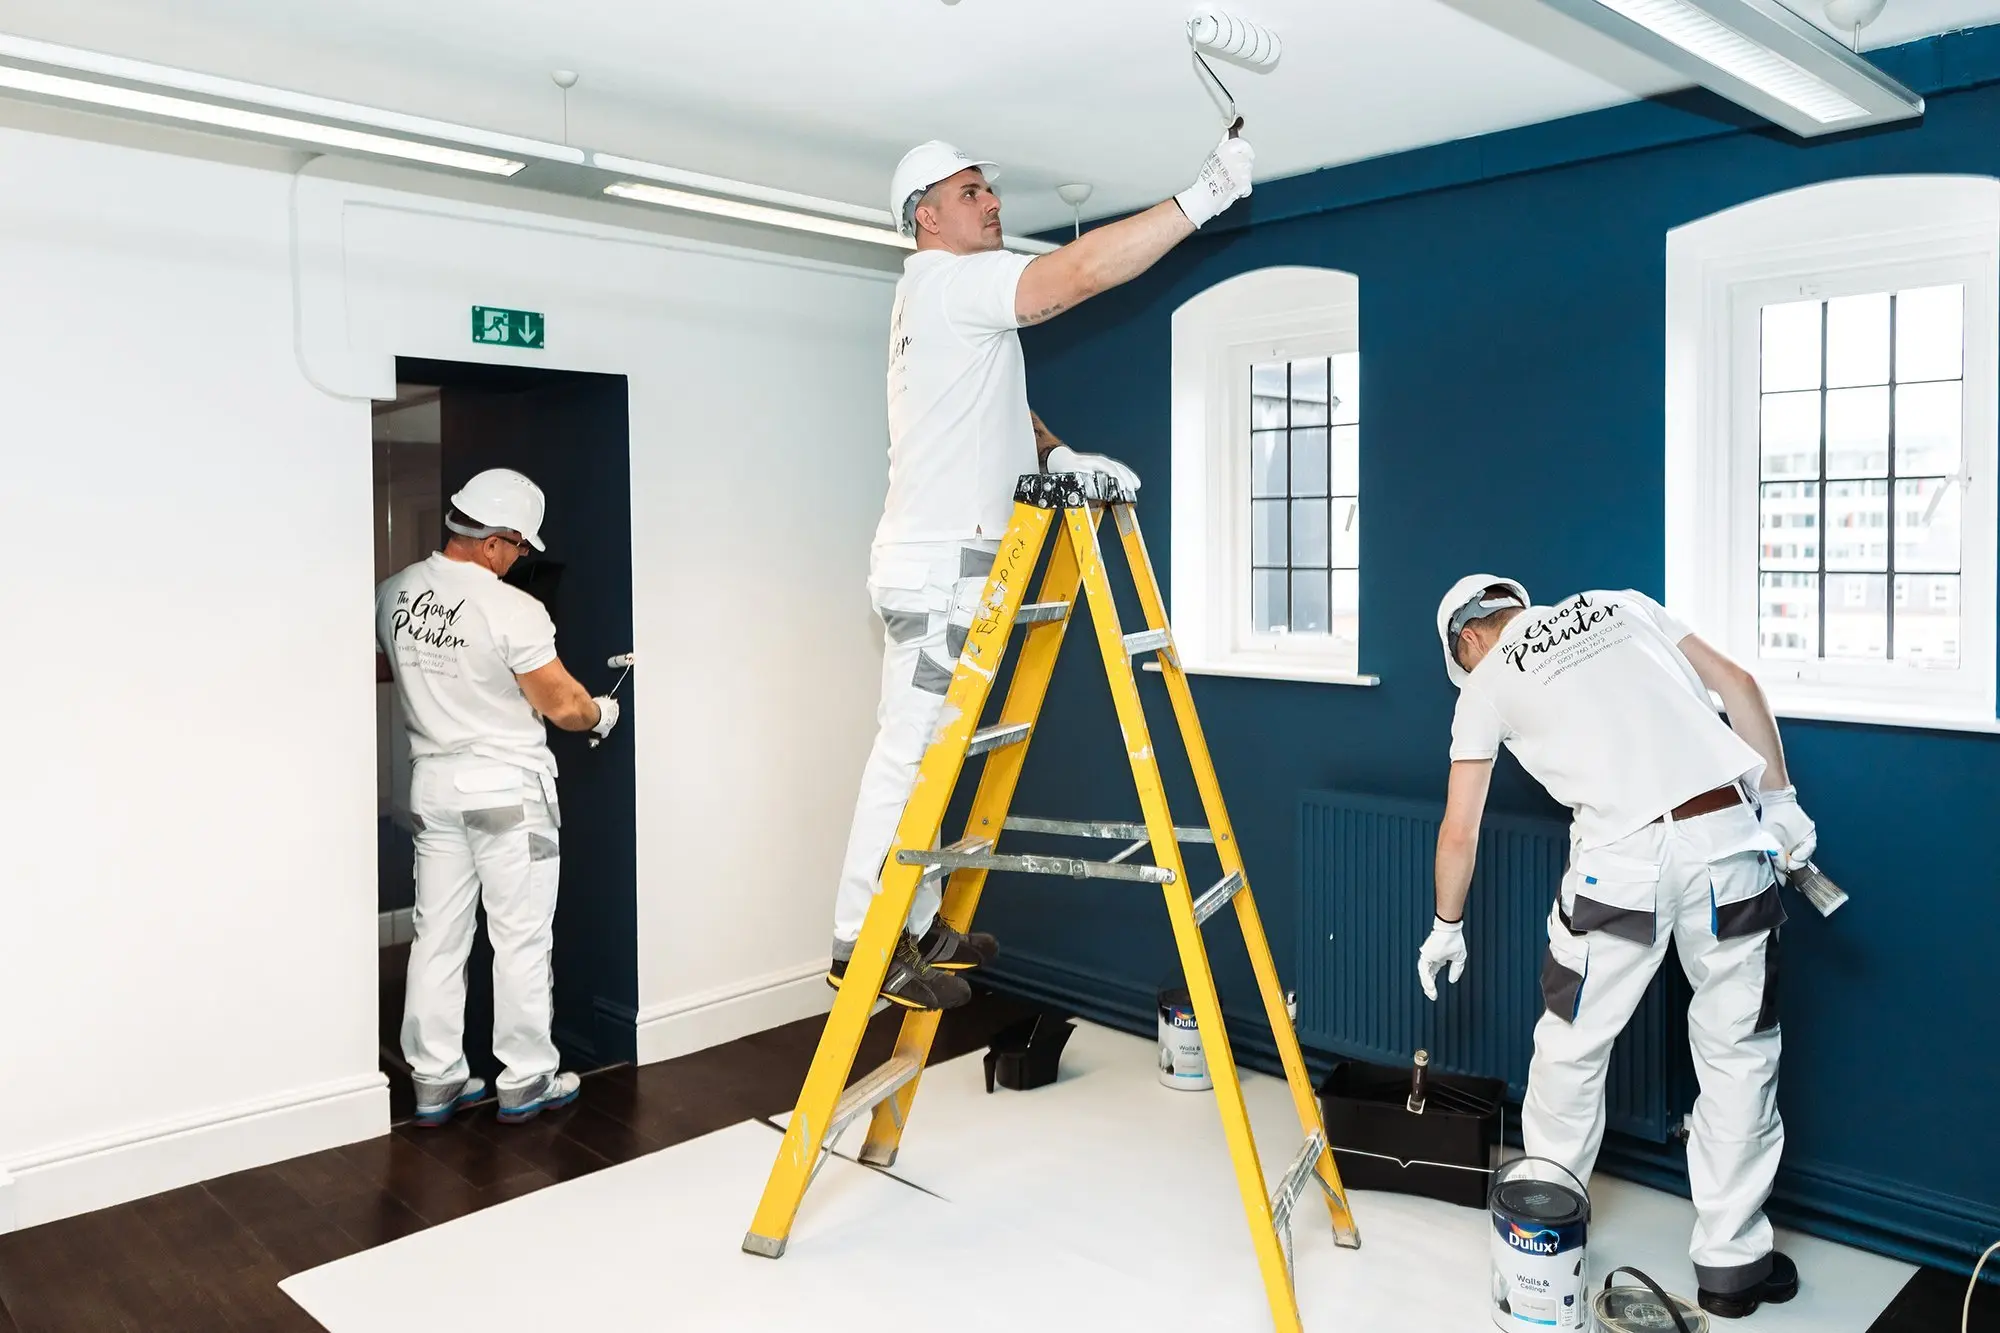 painting and decorating services uk